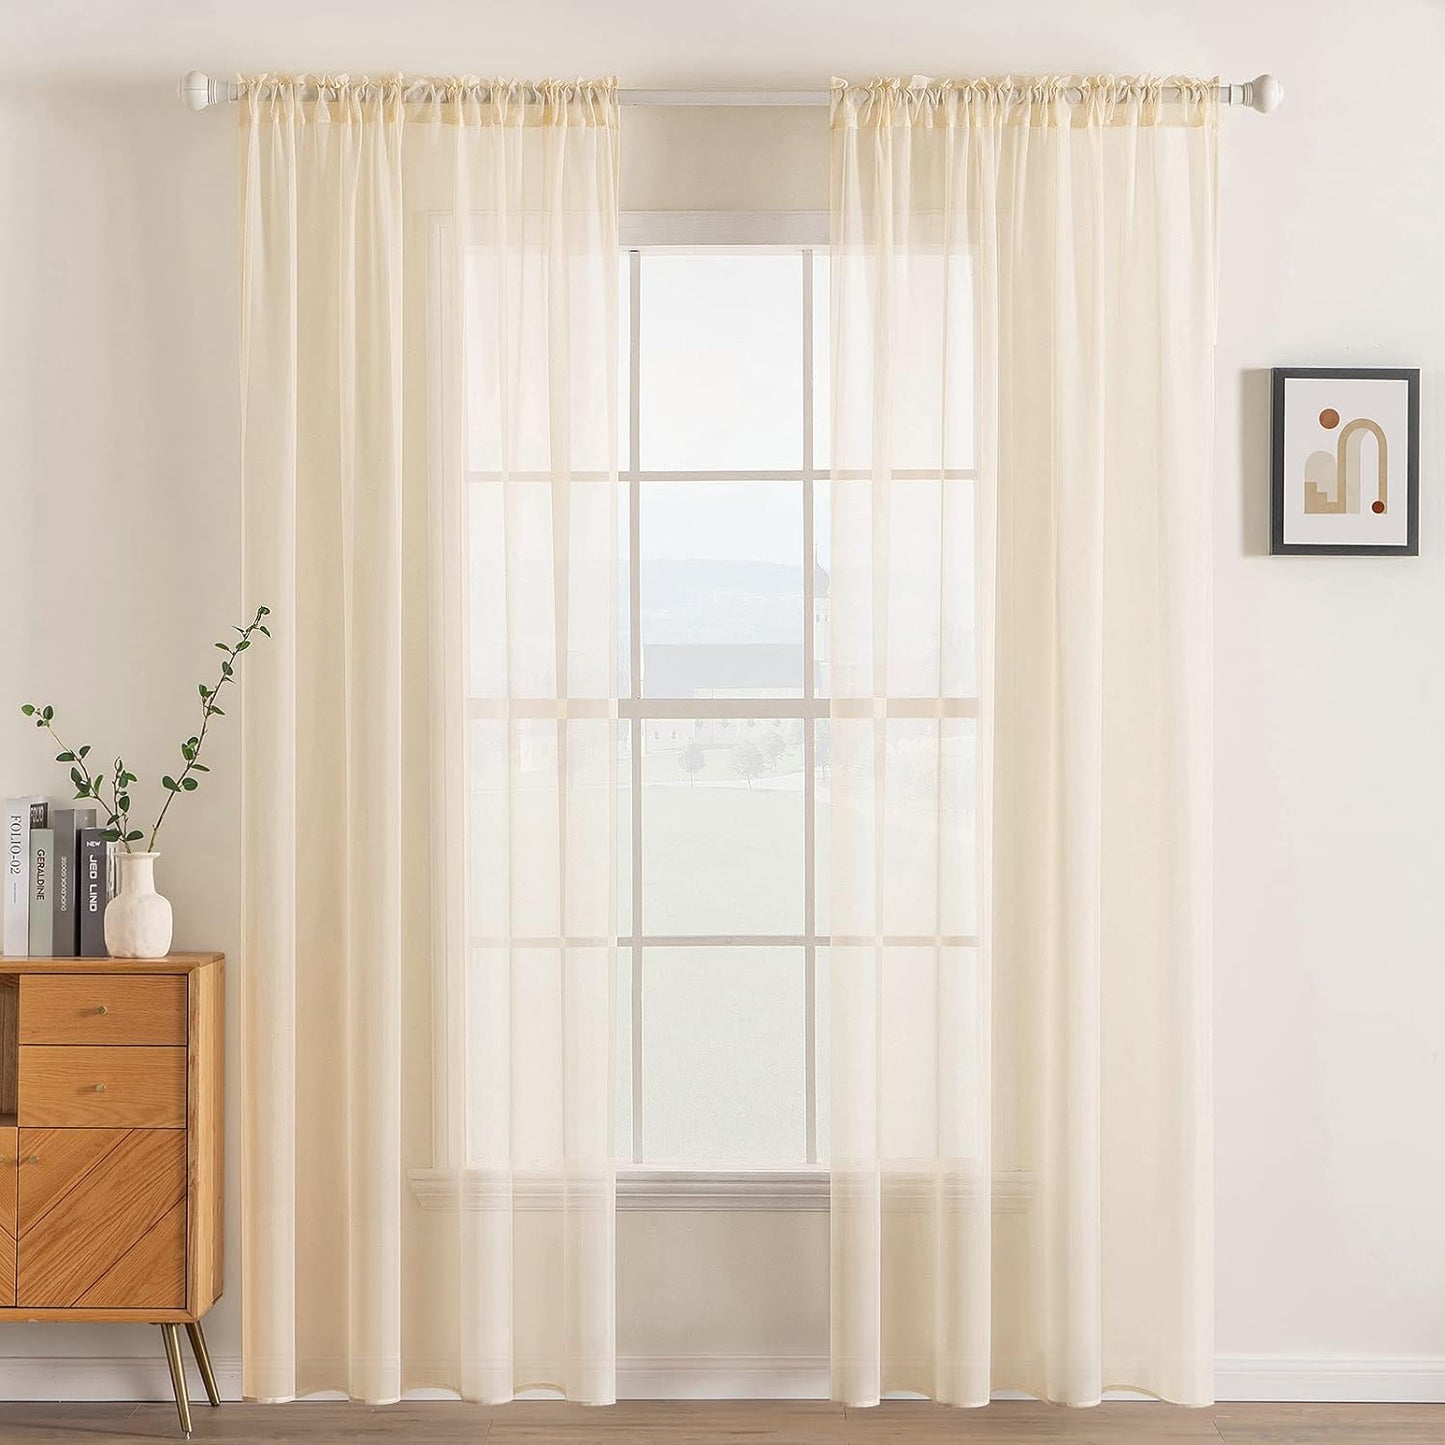 MIULEE White Sheer Curtains 96 Inches Long Window Curtains 2 Panels Solid Color Elegant Window Voile Panels/Drapes/Treatment for Bedroom Living Room (54 X 96 Inches White)  MIULEE Cream Beige 38''W X 72''L 